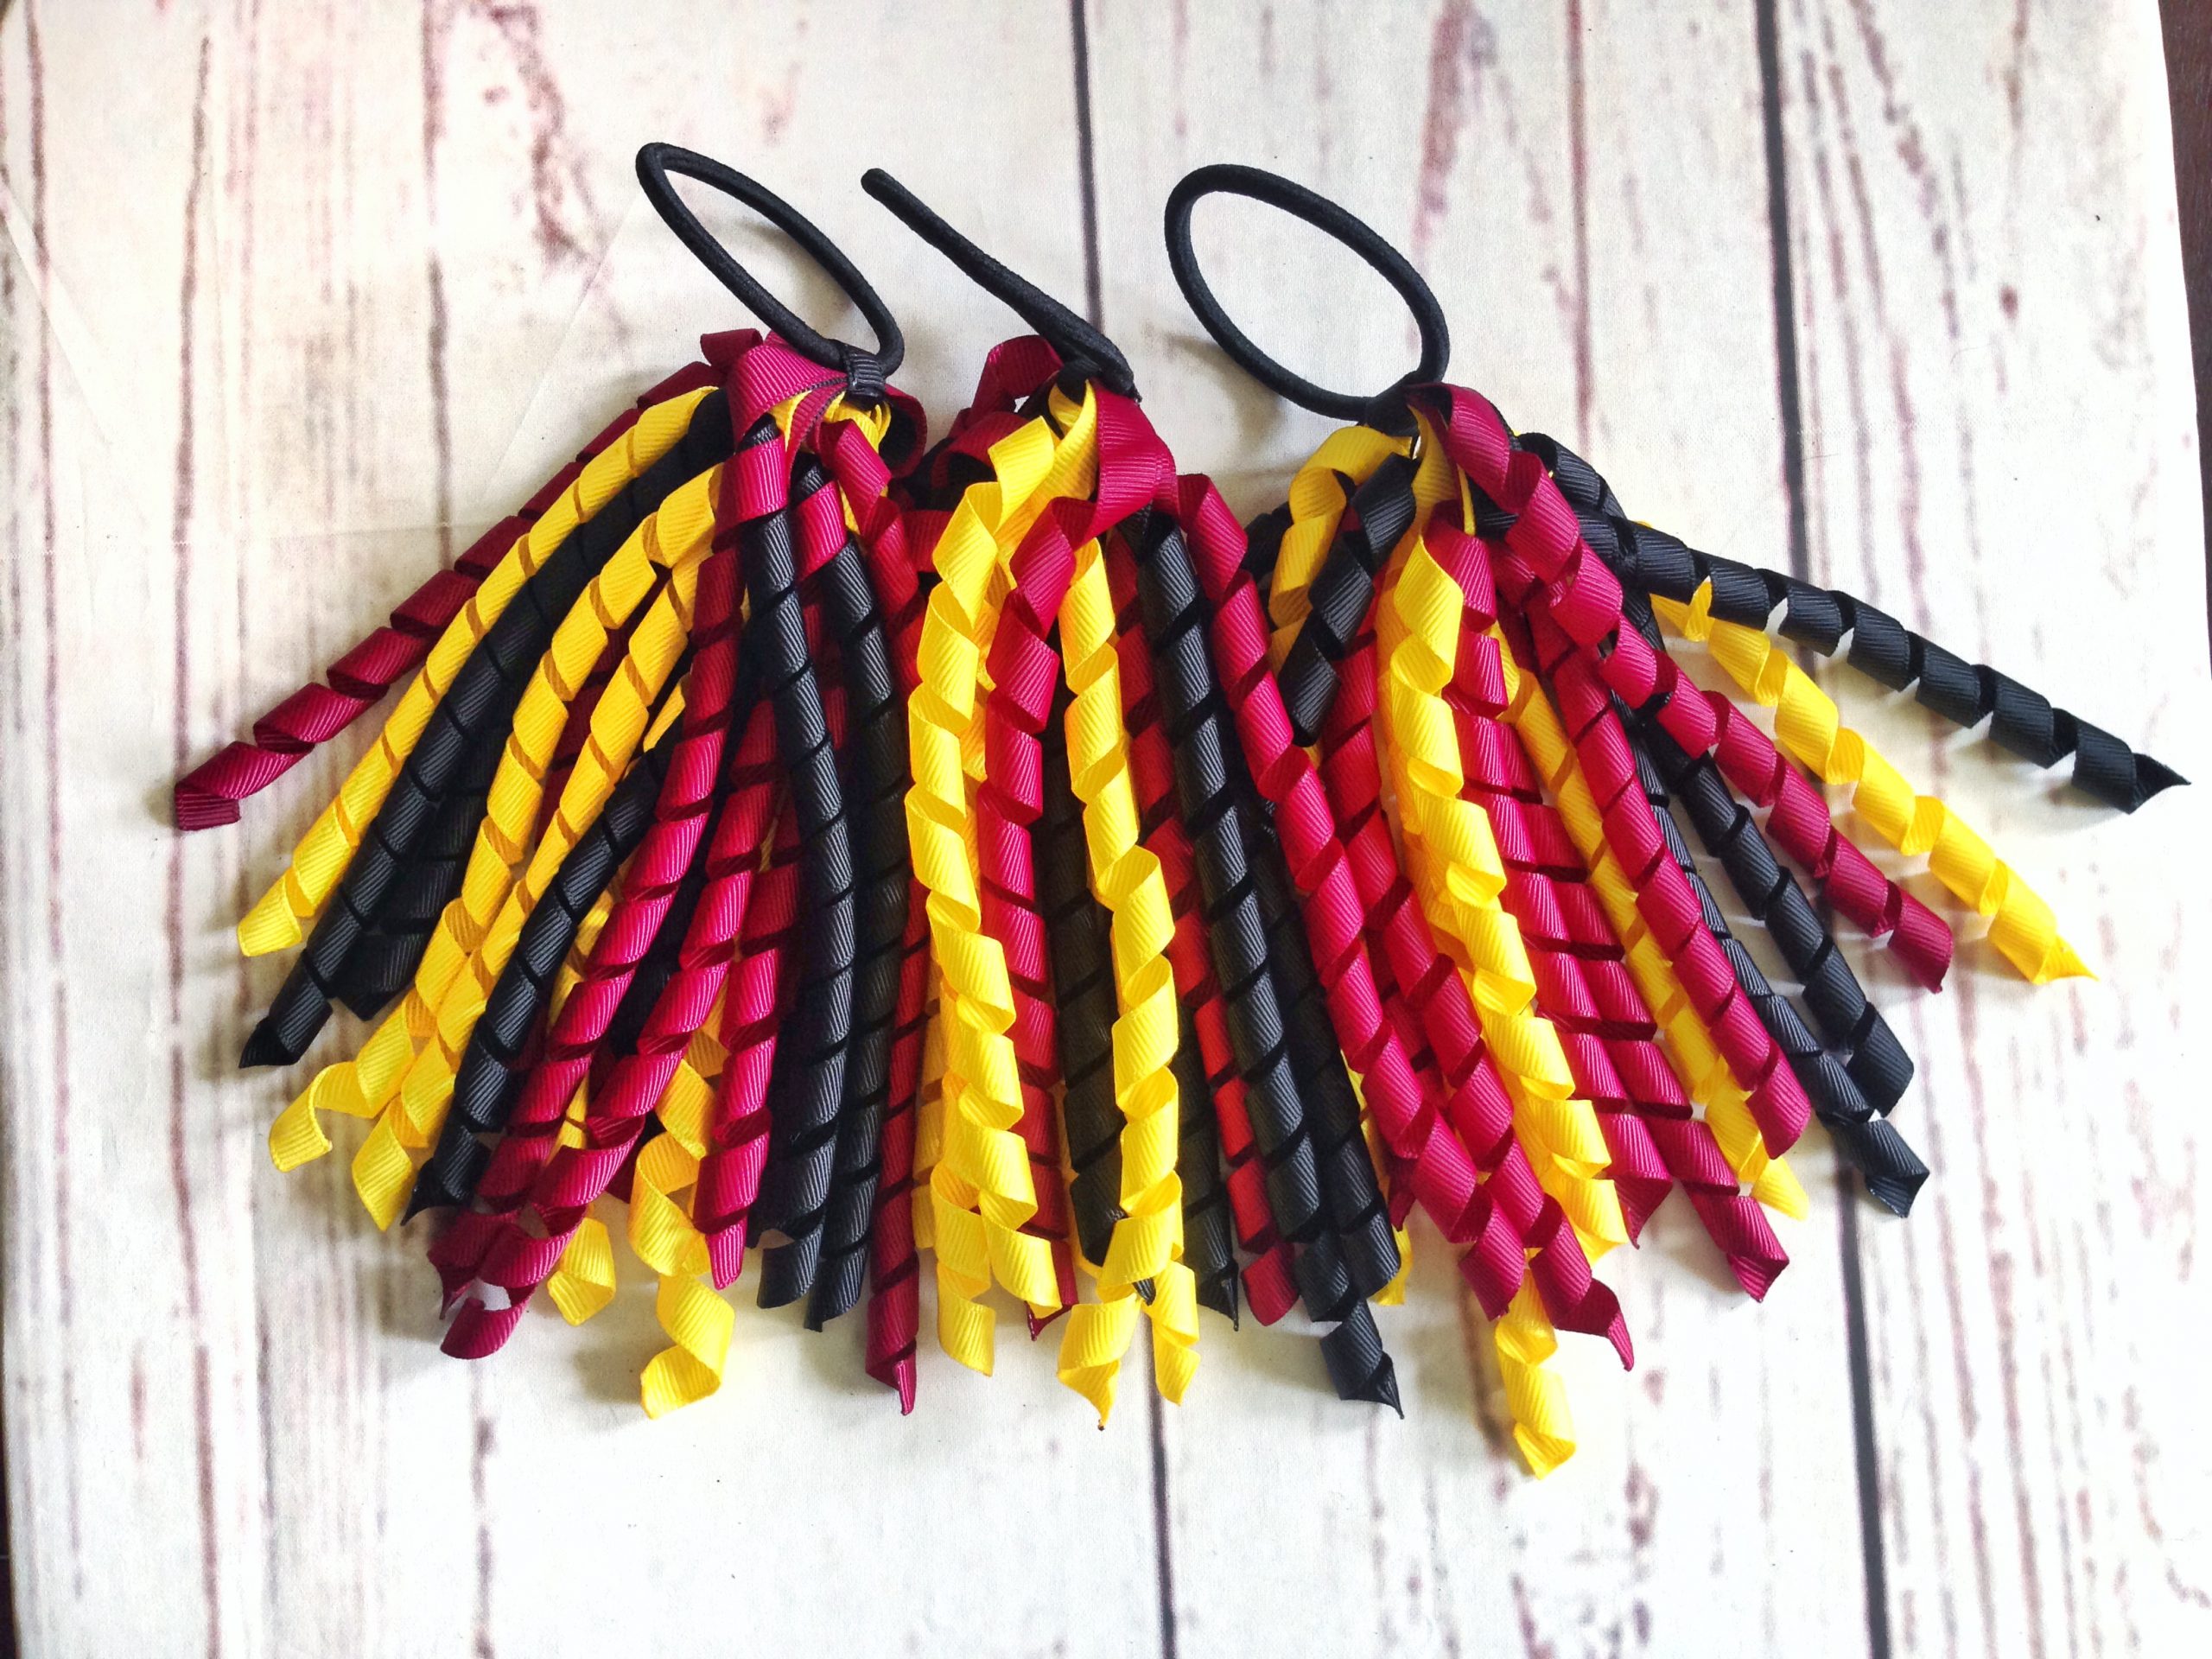 Indigenous Hair Accessories 1 Handmade ampampamp High Quality School Hair Accessories Available in Clips Hairties Headbands Bunwraps and More Wholesale ampampampamp Fundraising Prices available to schools pampampampampc and organisations